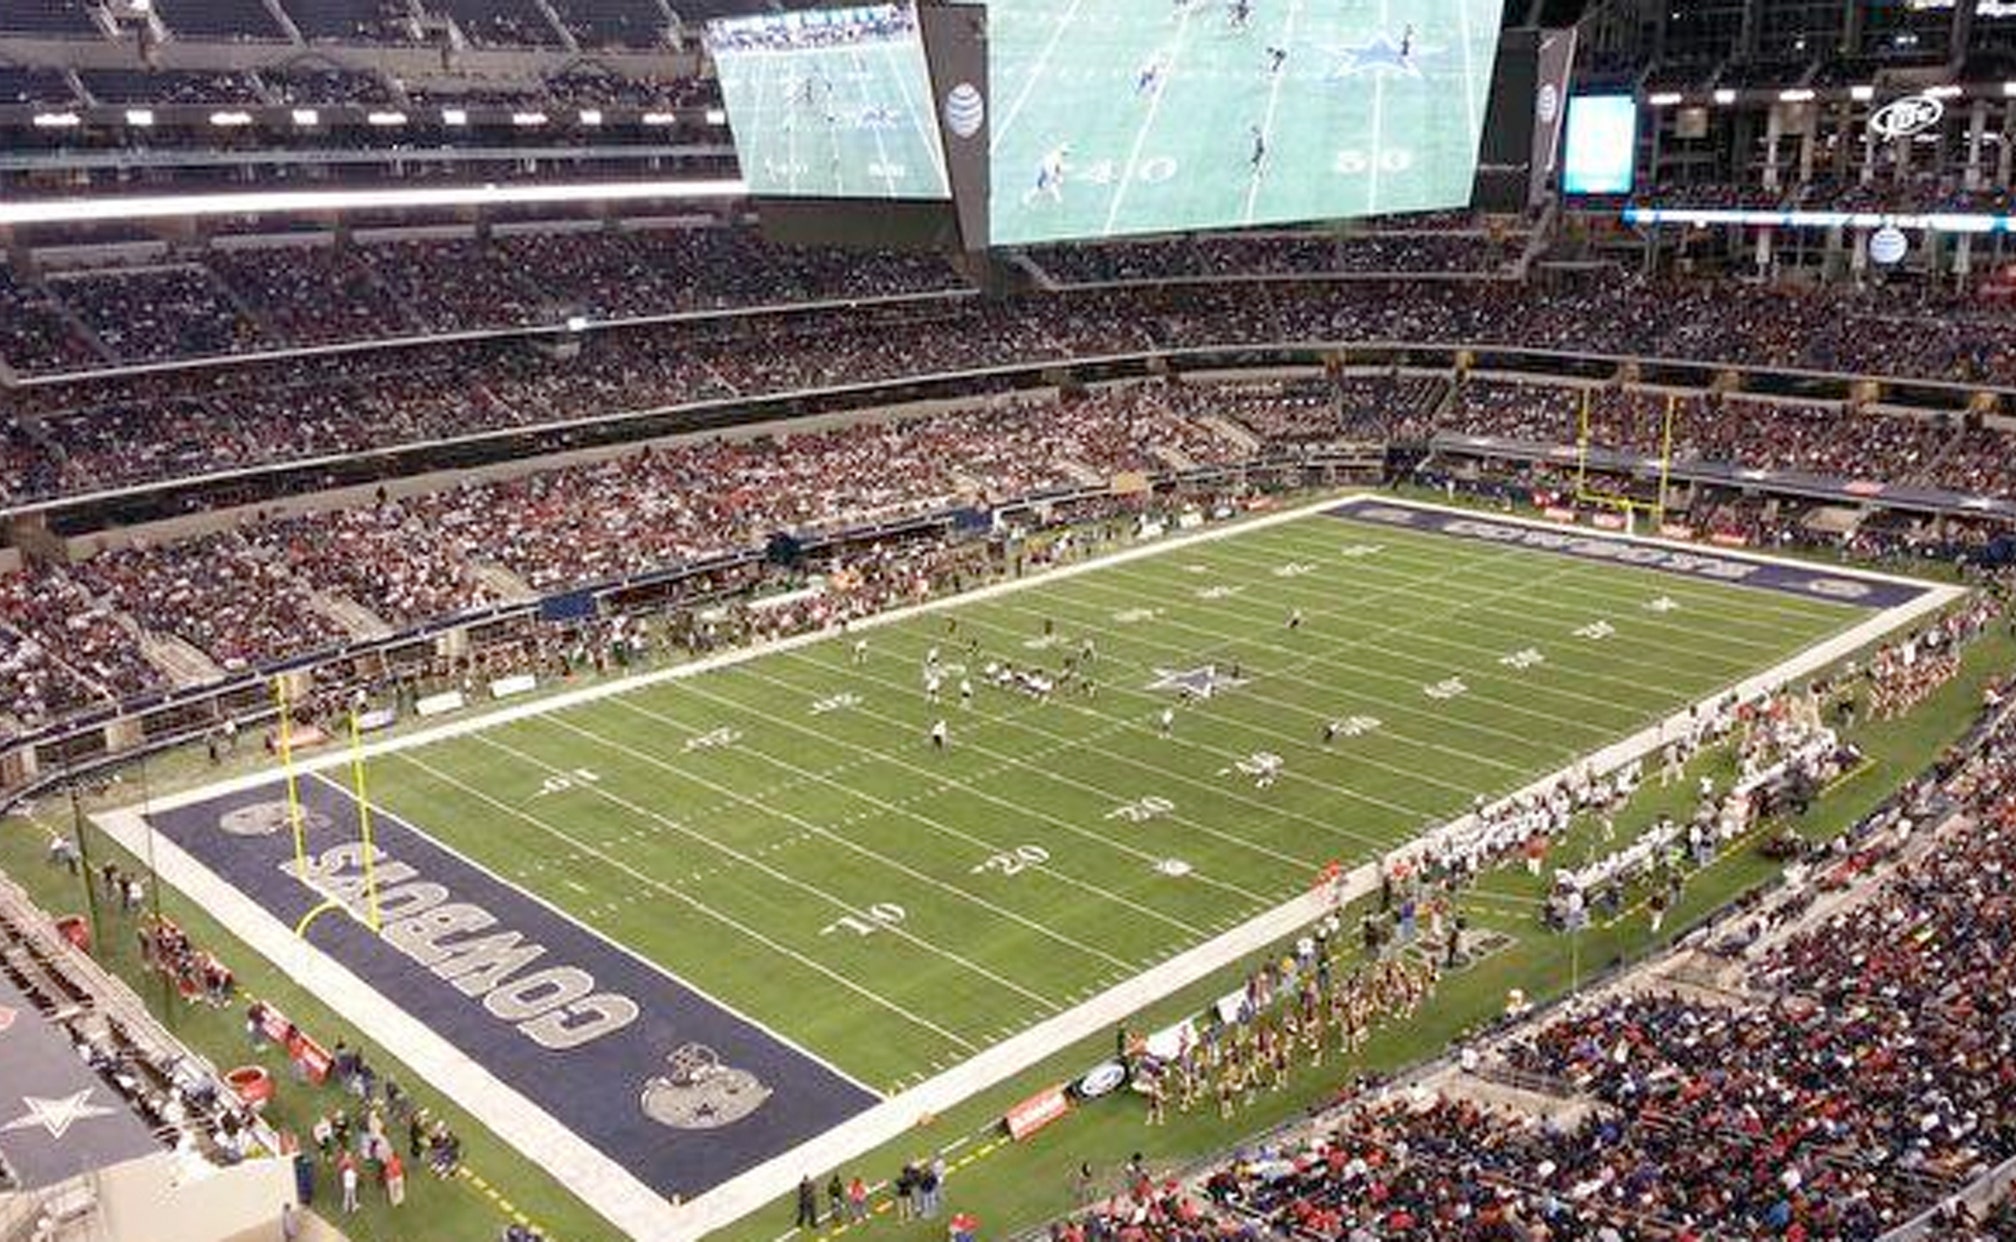 More fans at Texas high school championship than NFL game FOX Sports